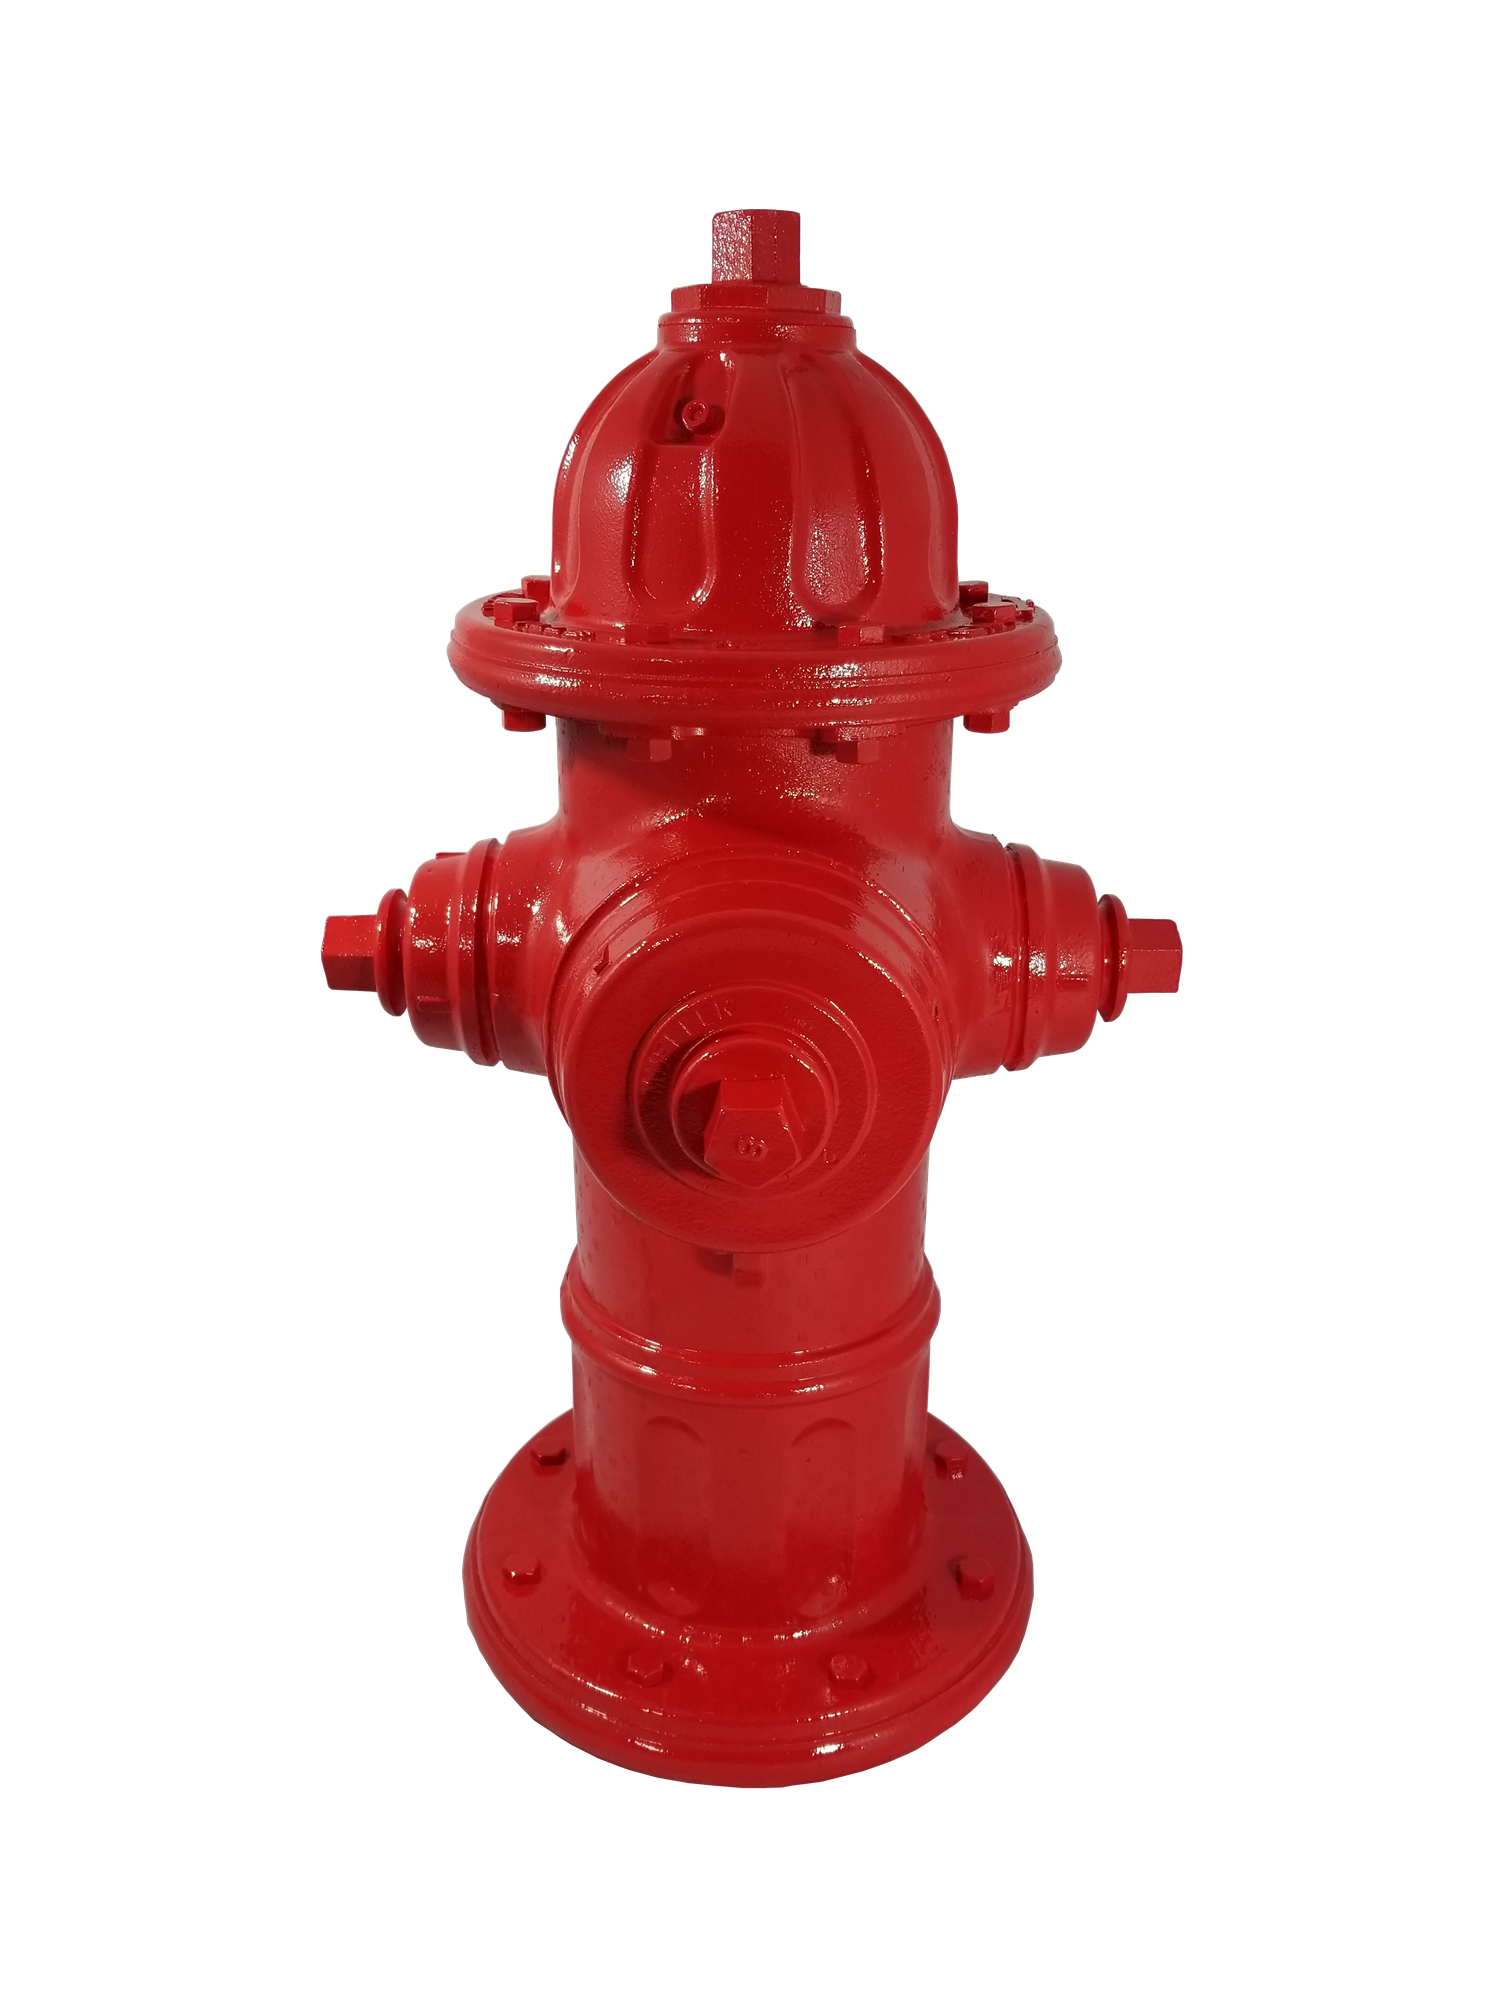 Fire Hydrant Transparent Background